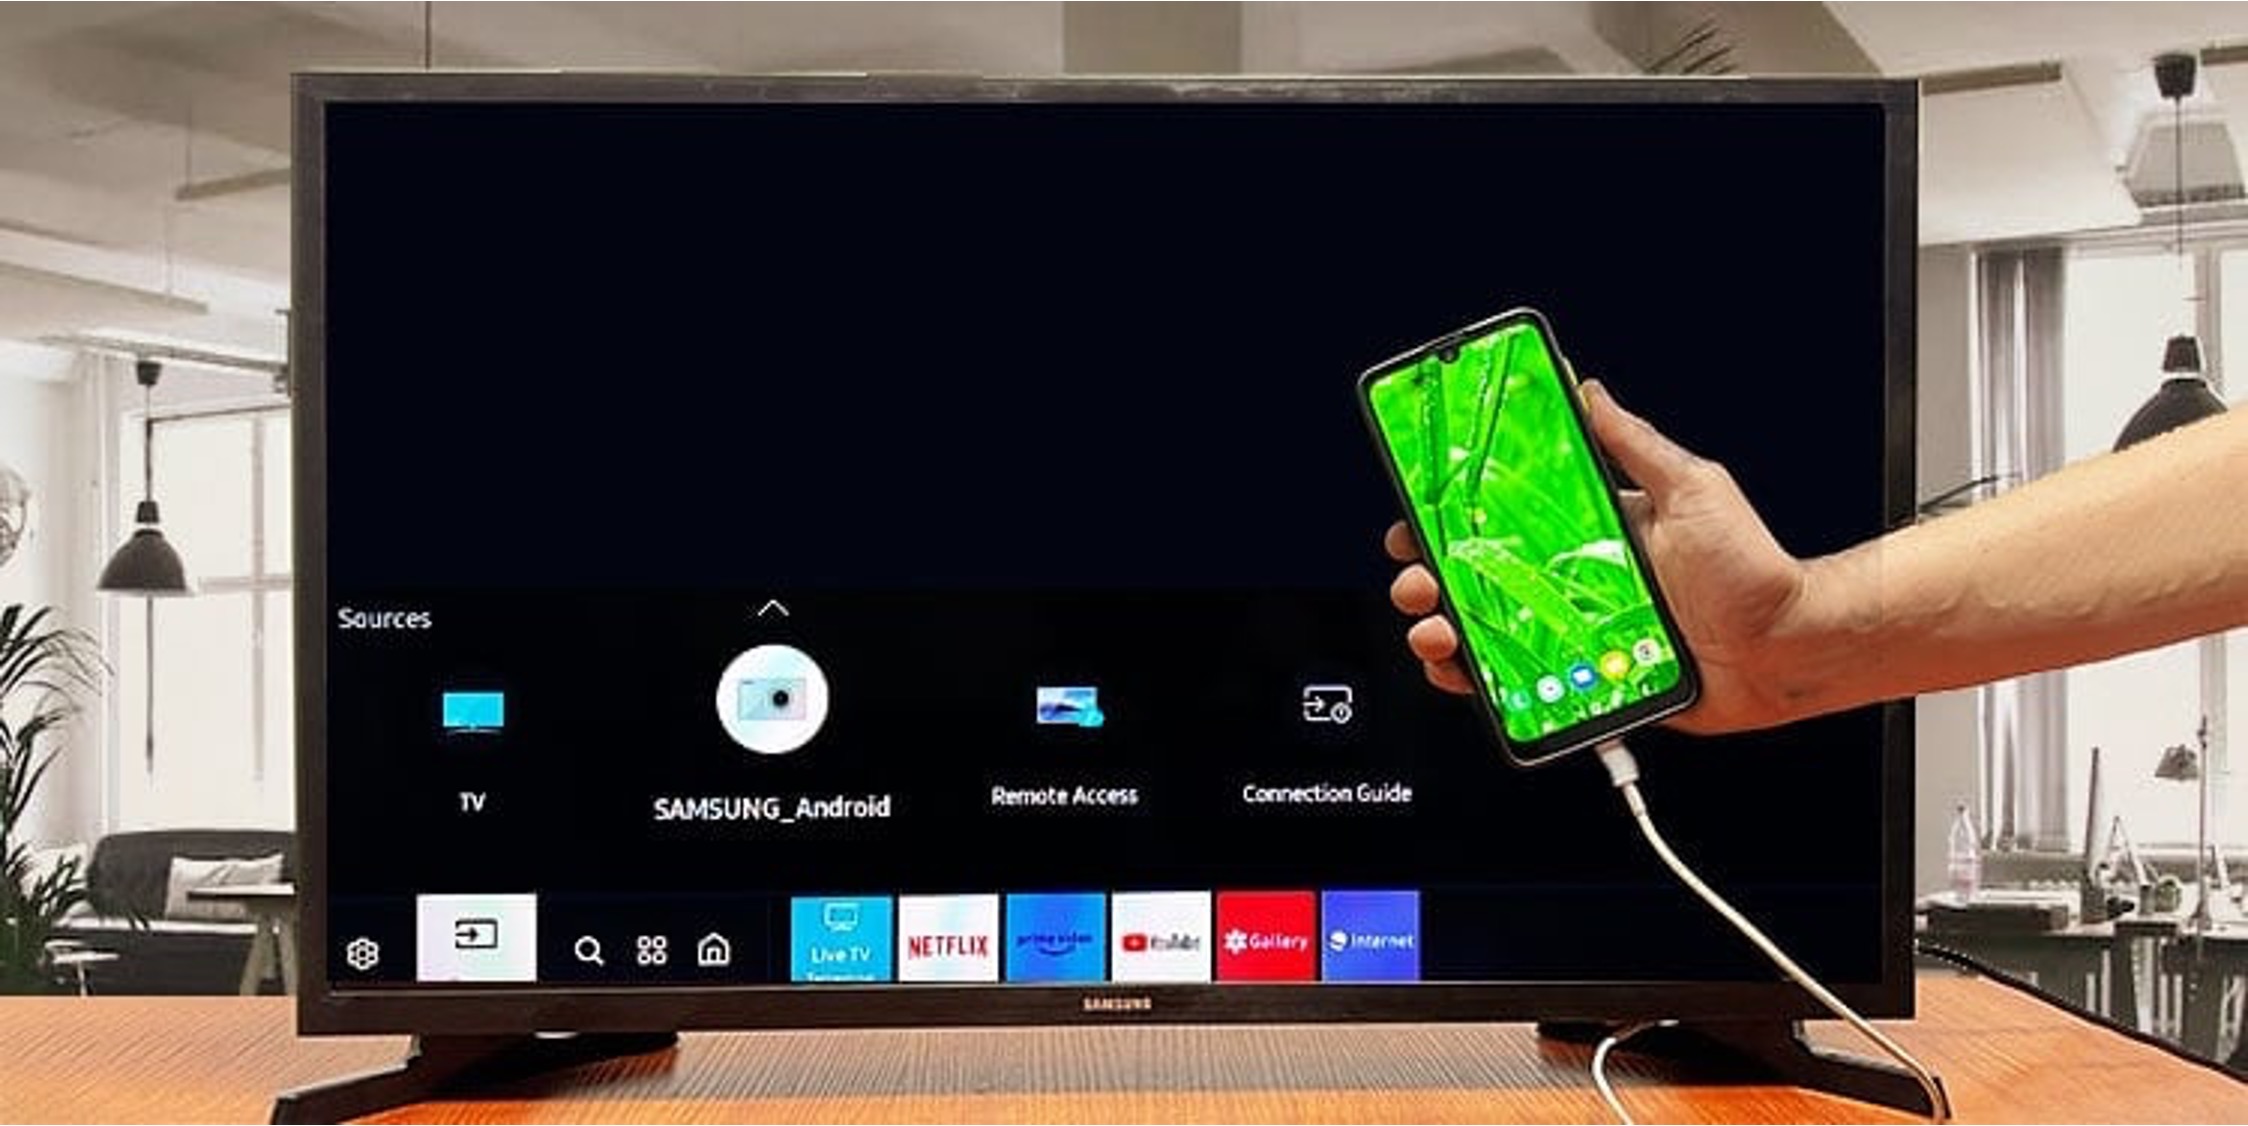 How Do I Can Use My Android Phone As USB For My LED TV